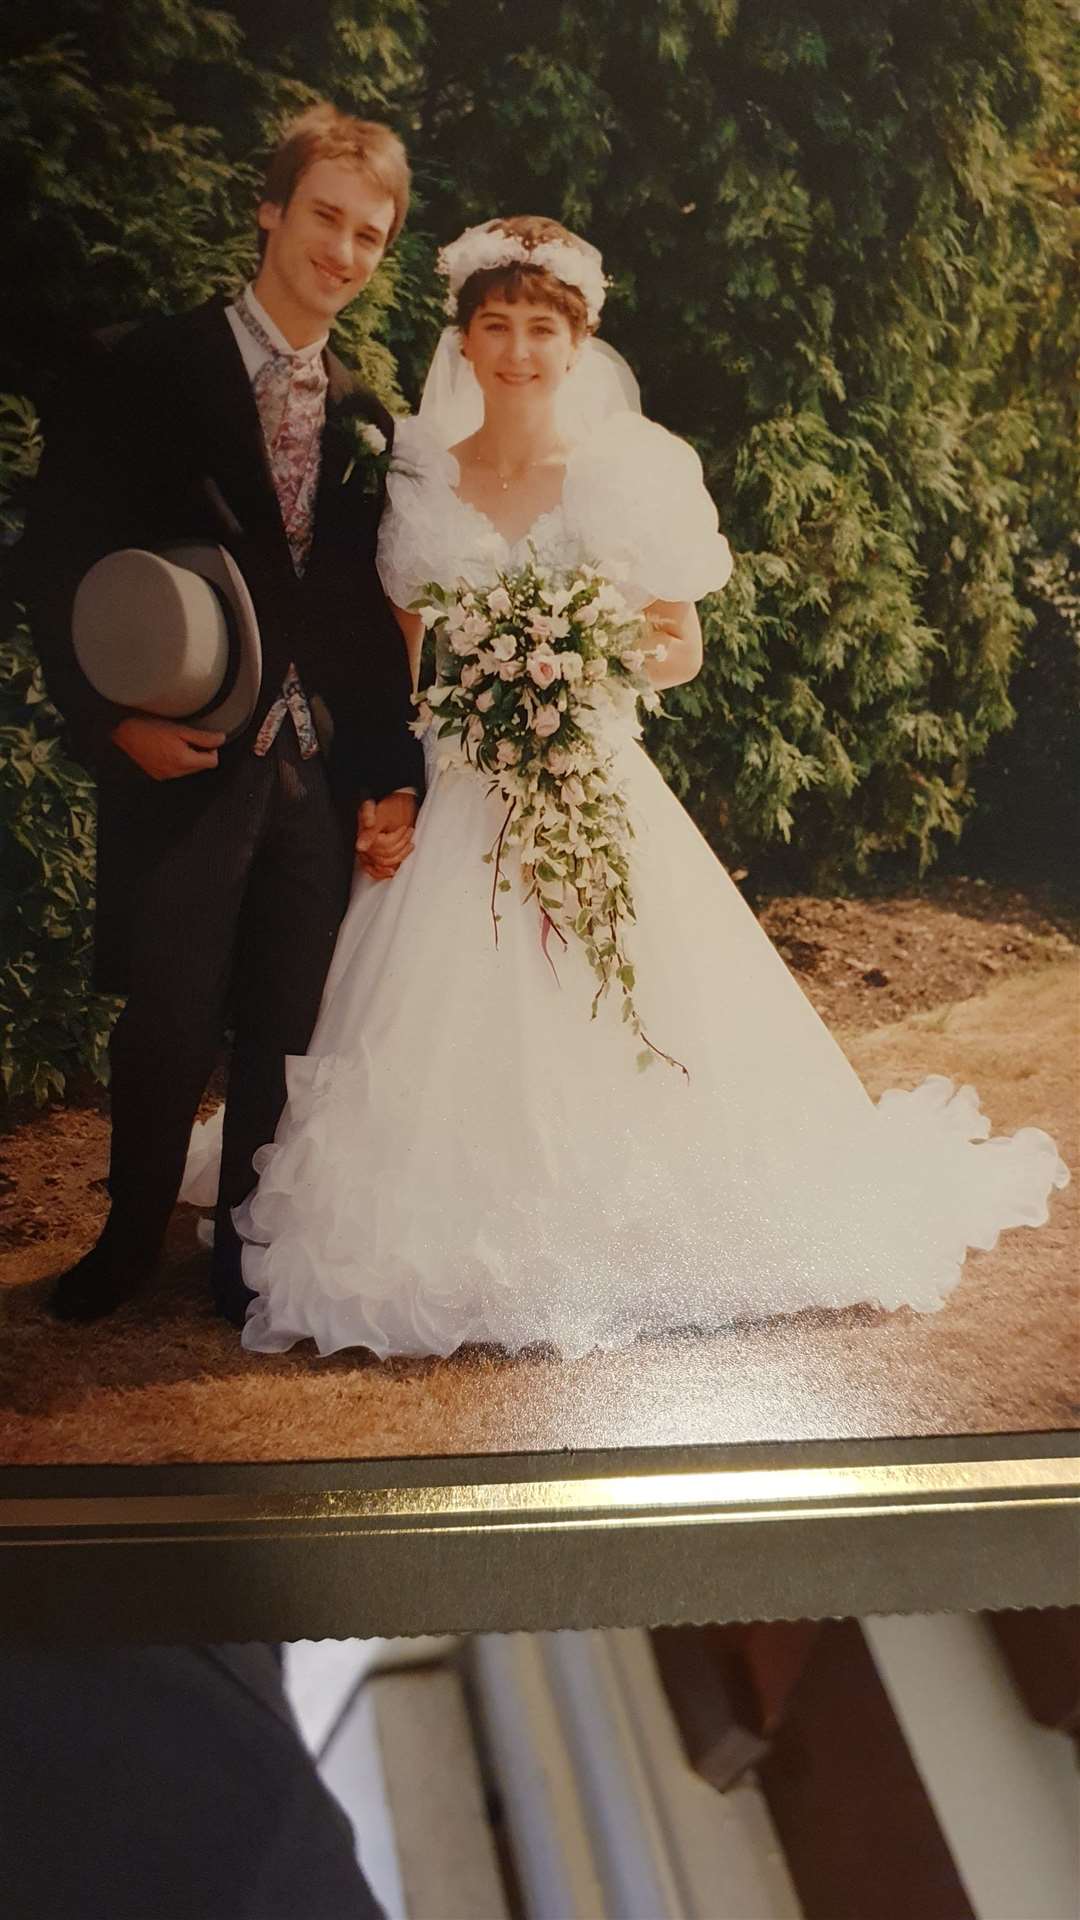 Karl and Simone on their wedding day in 1995